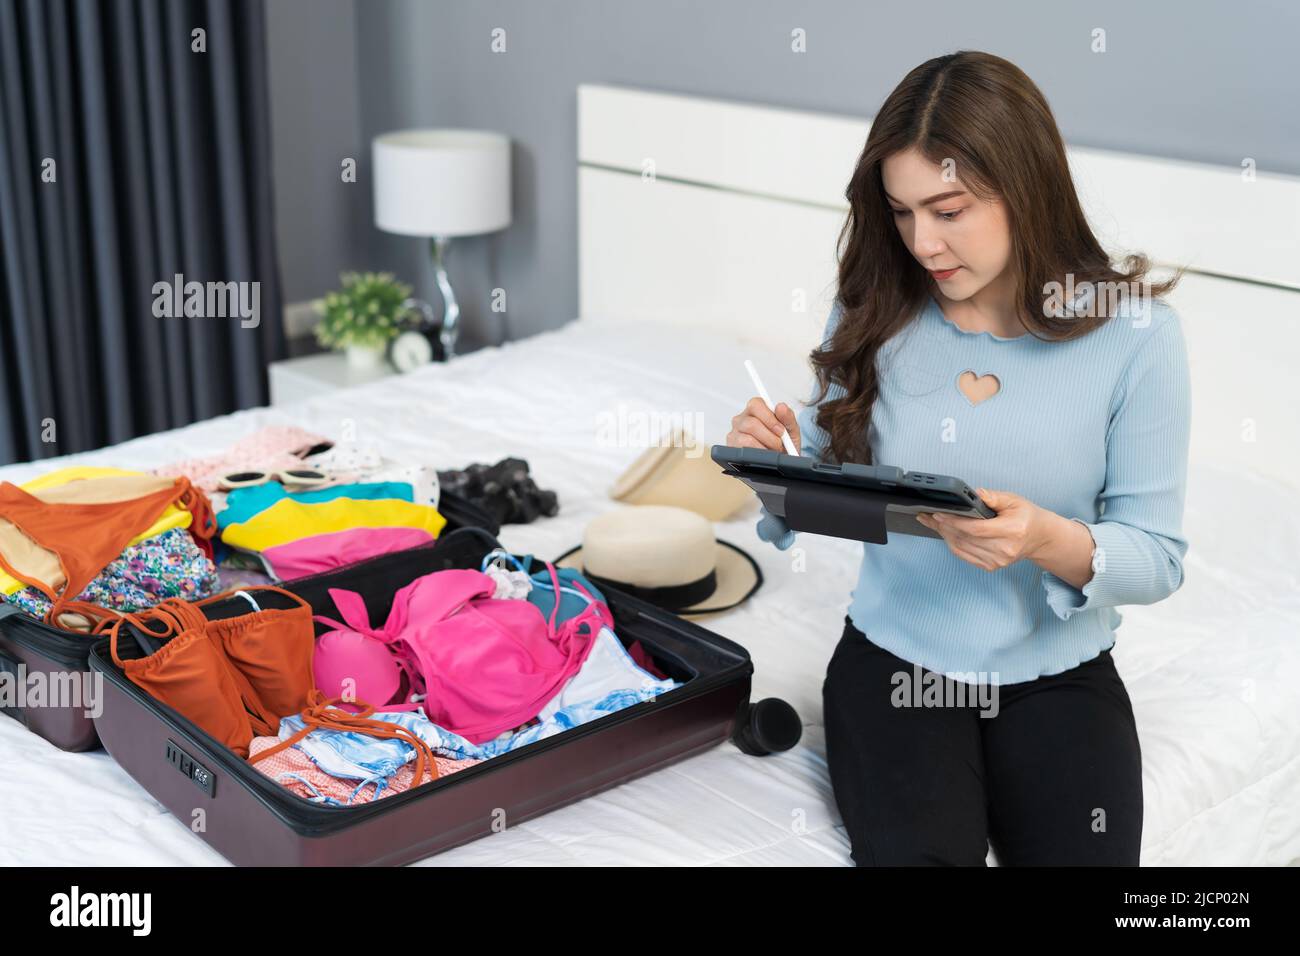 young woman writing tablet and packing clothes into suitcase on a bed at home, planning travel holiday. Stock Photo